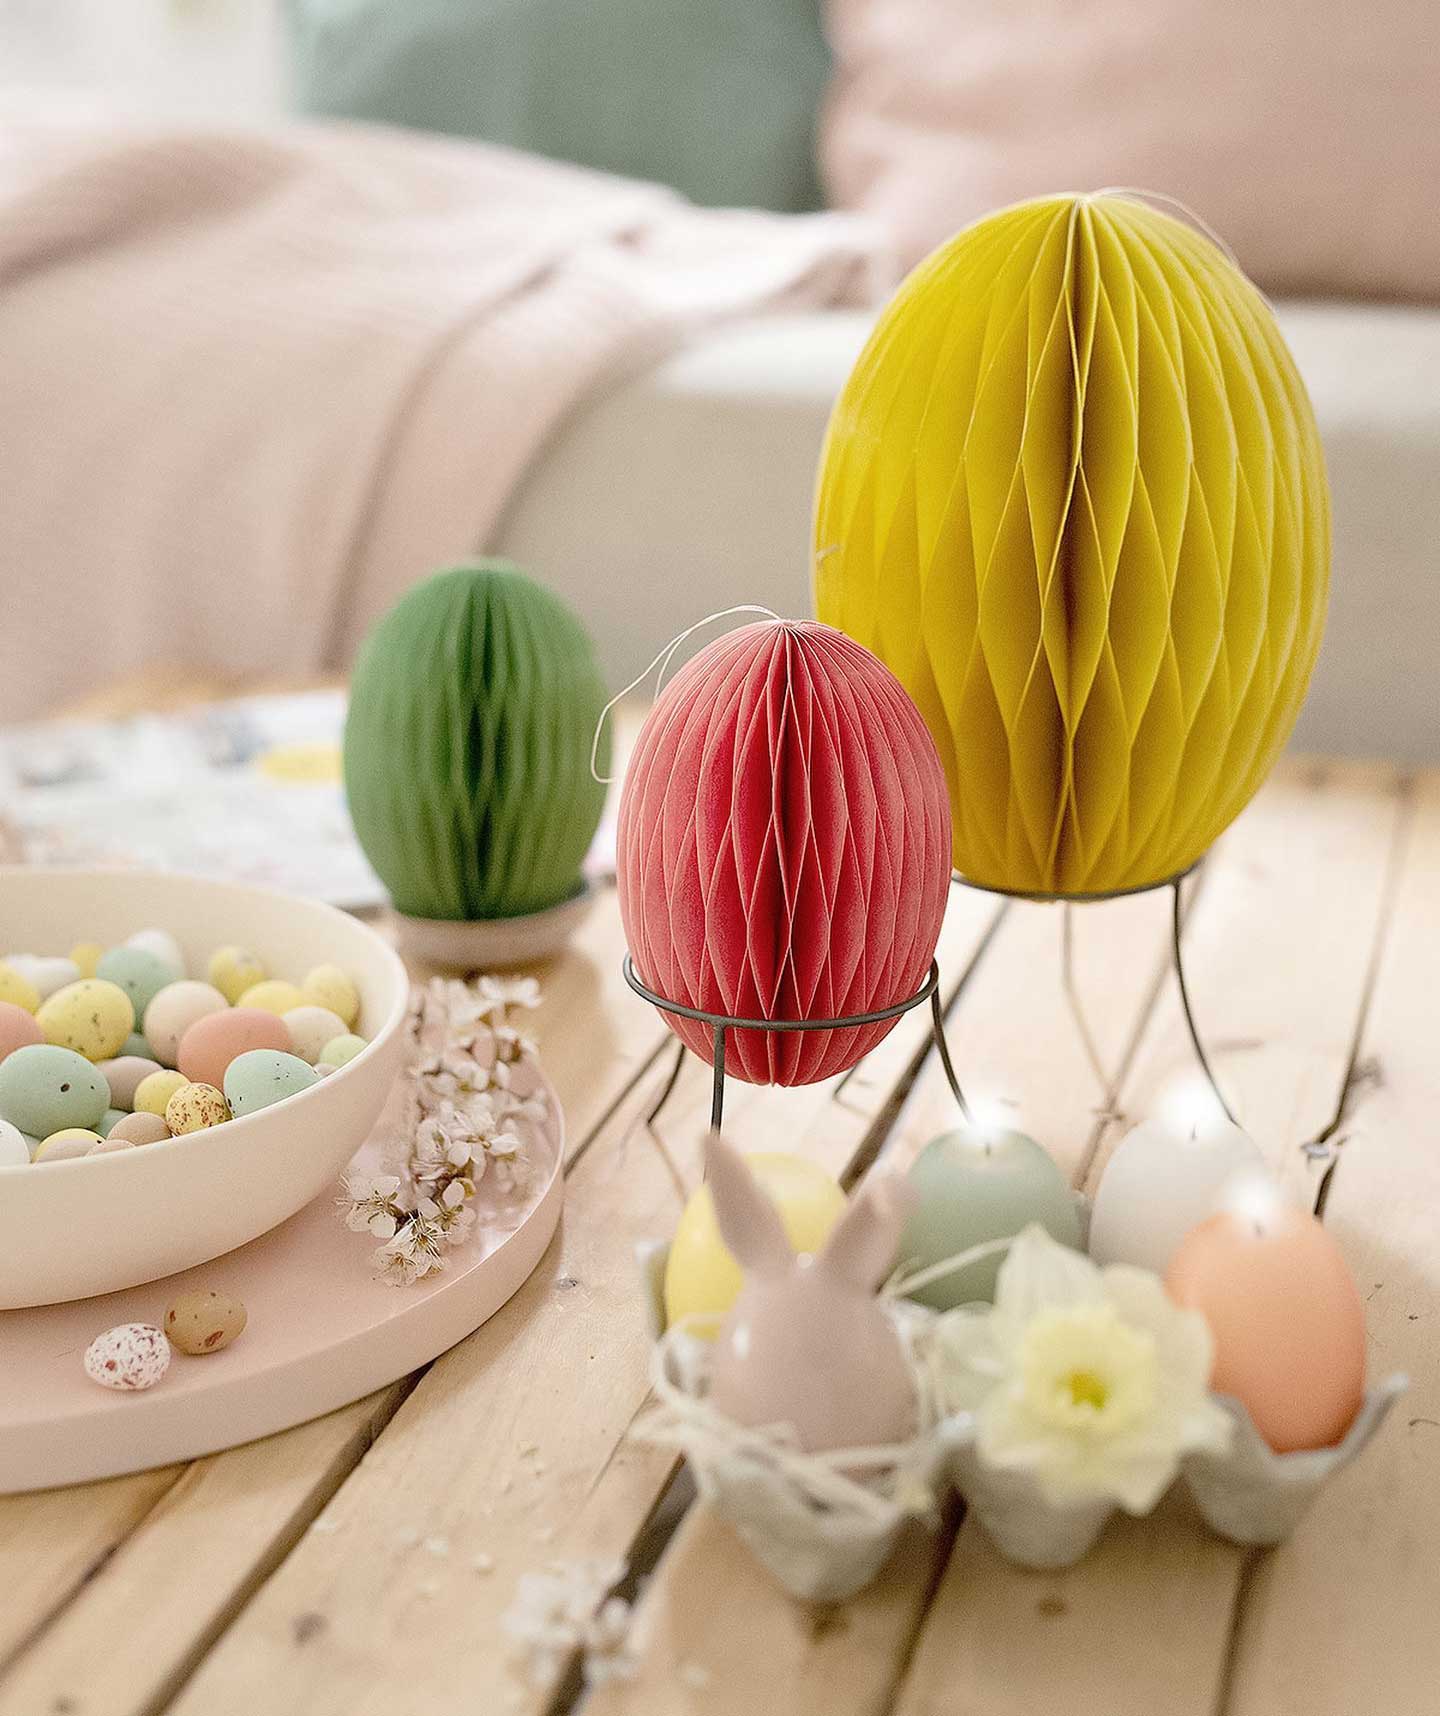 Table decorated with colorful paper eggs